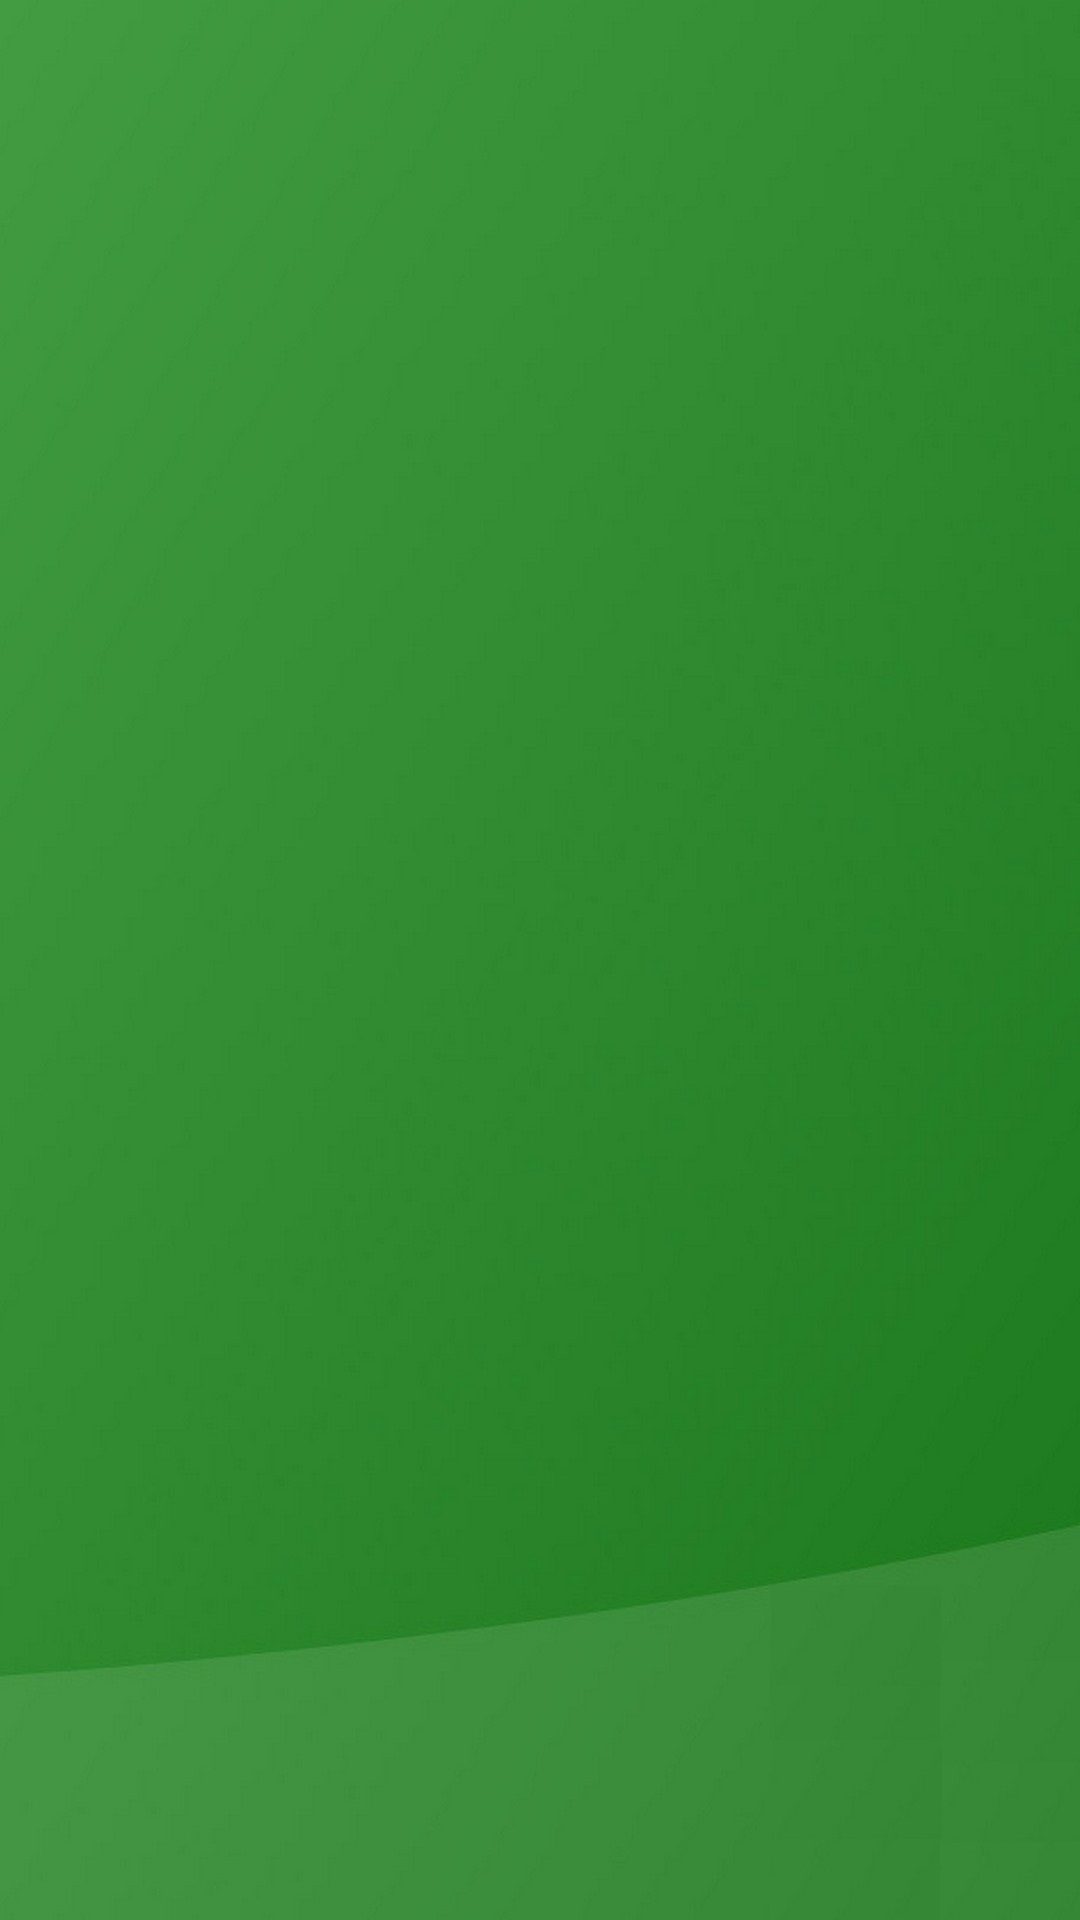 Green HD Wallpapers For Android with resolution 1080X1920 pixel. You can make this wallpaper for your Android backgrounds, Tablet, Smartphones Screensavers and Mobile Phone Lock Screen